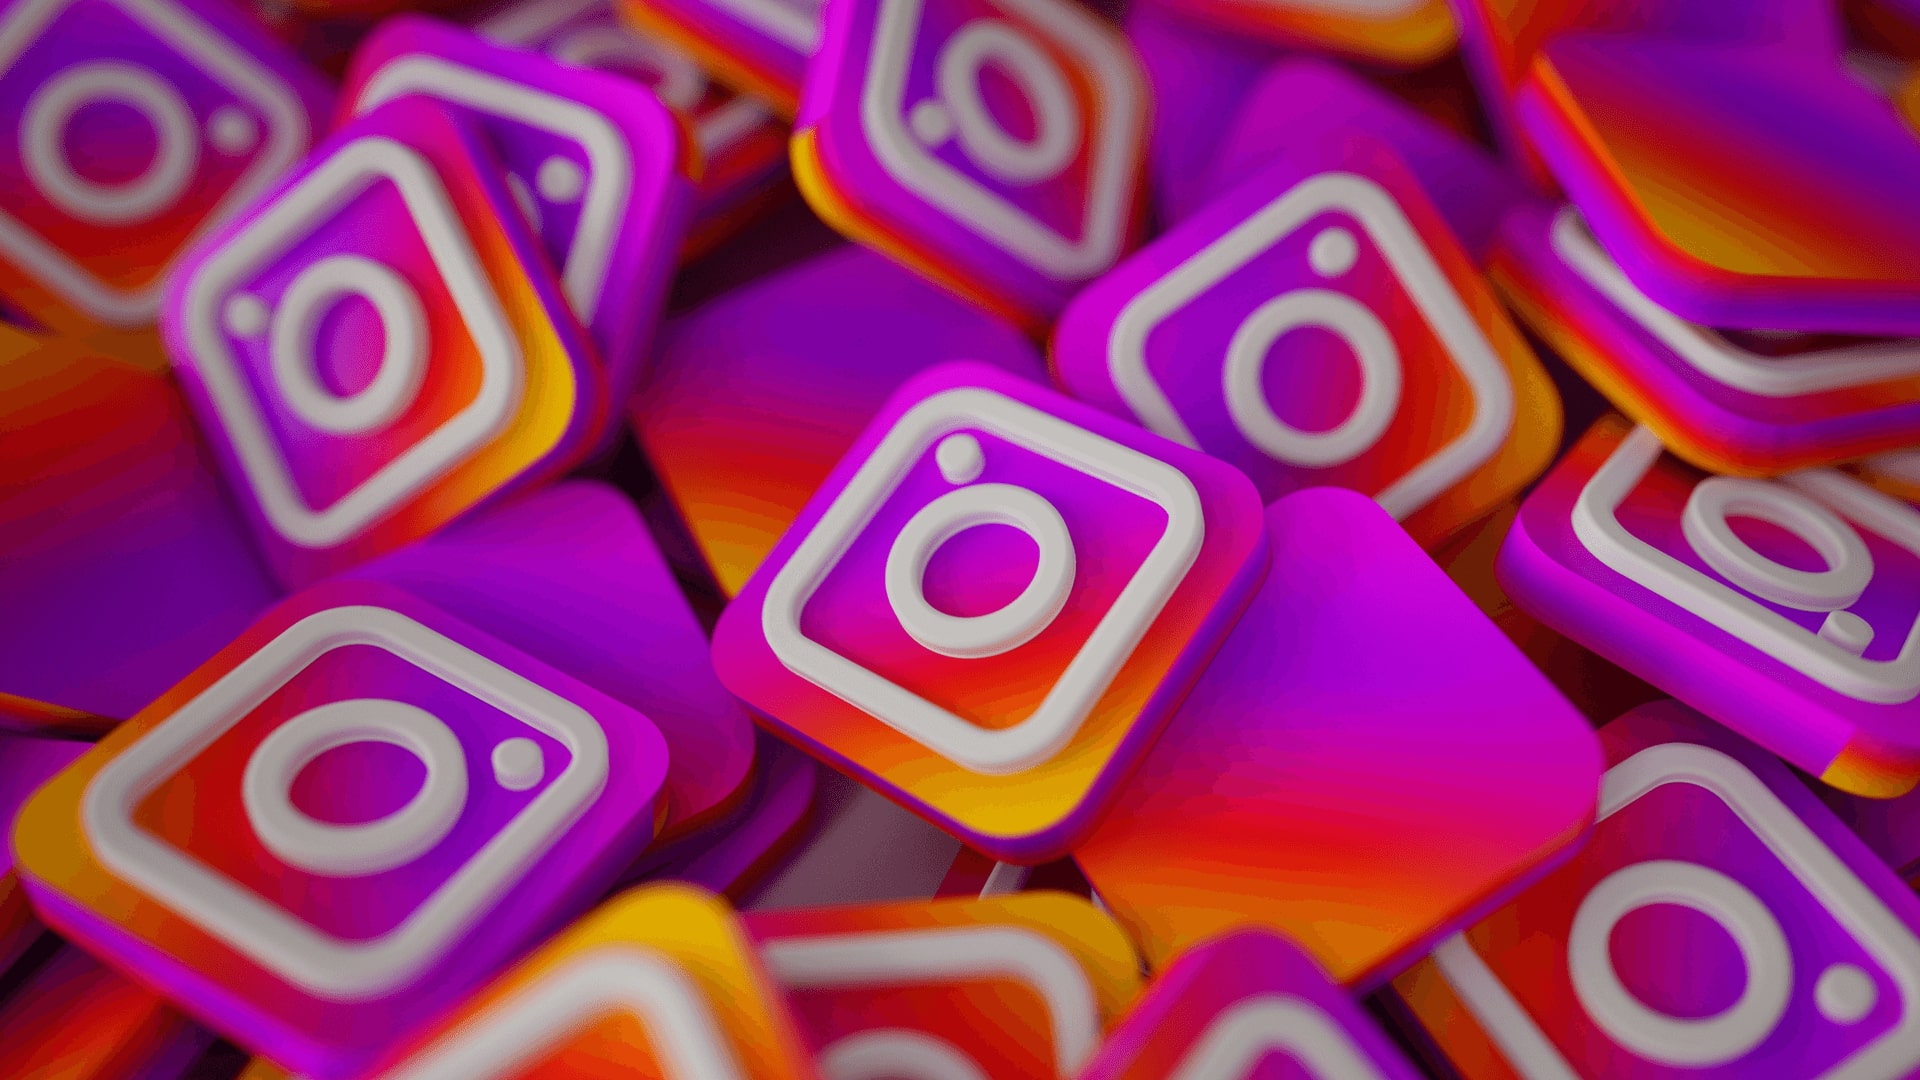 7 Visual Trends for Your Design Instagram Account in 2019/2020